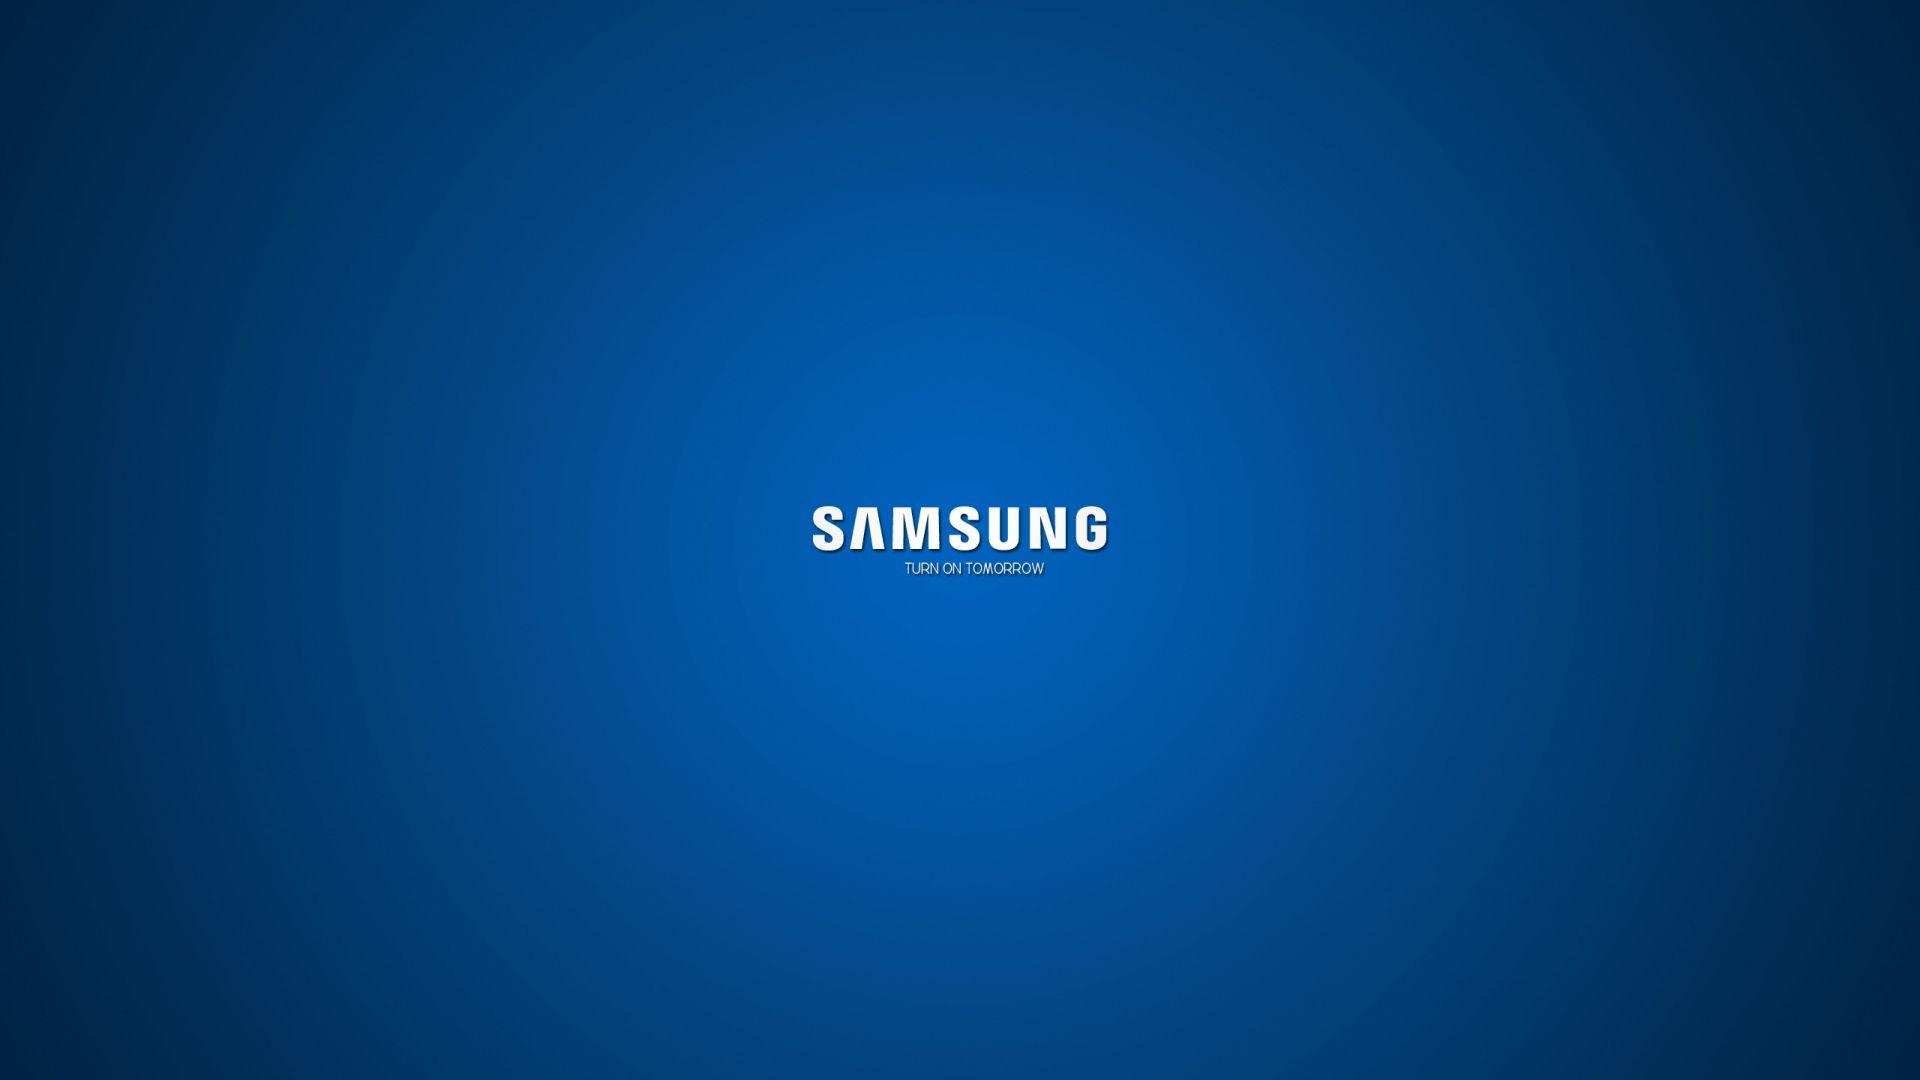 Download Wallpapers 1920x1080 Samsung, Company, Logo, Blue, White